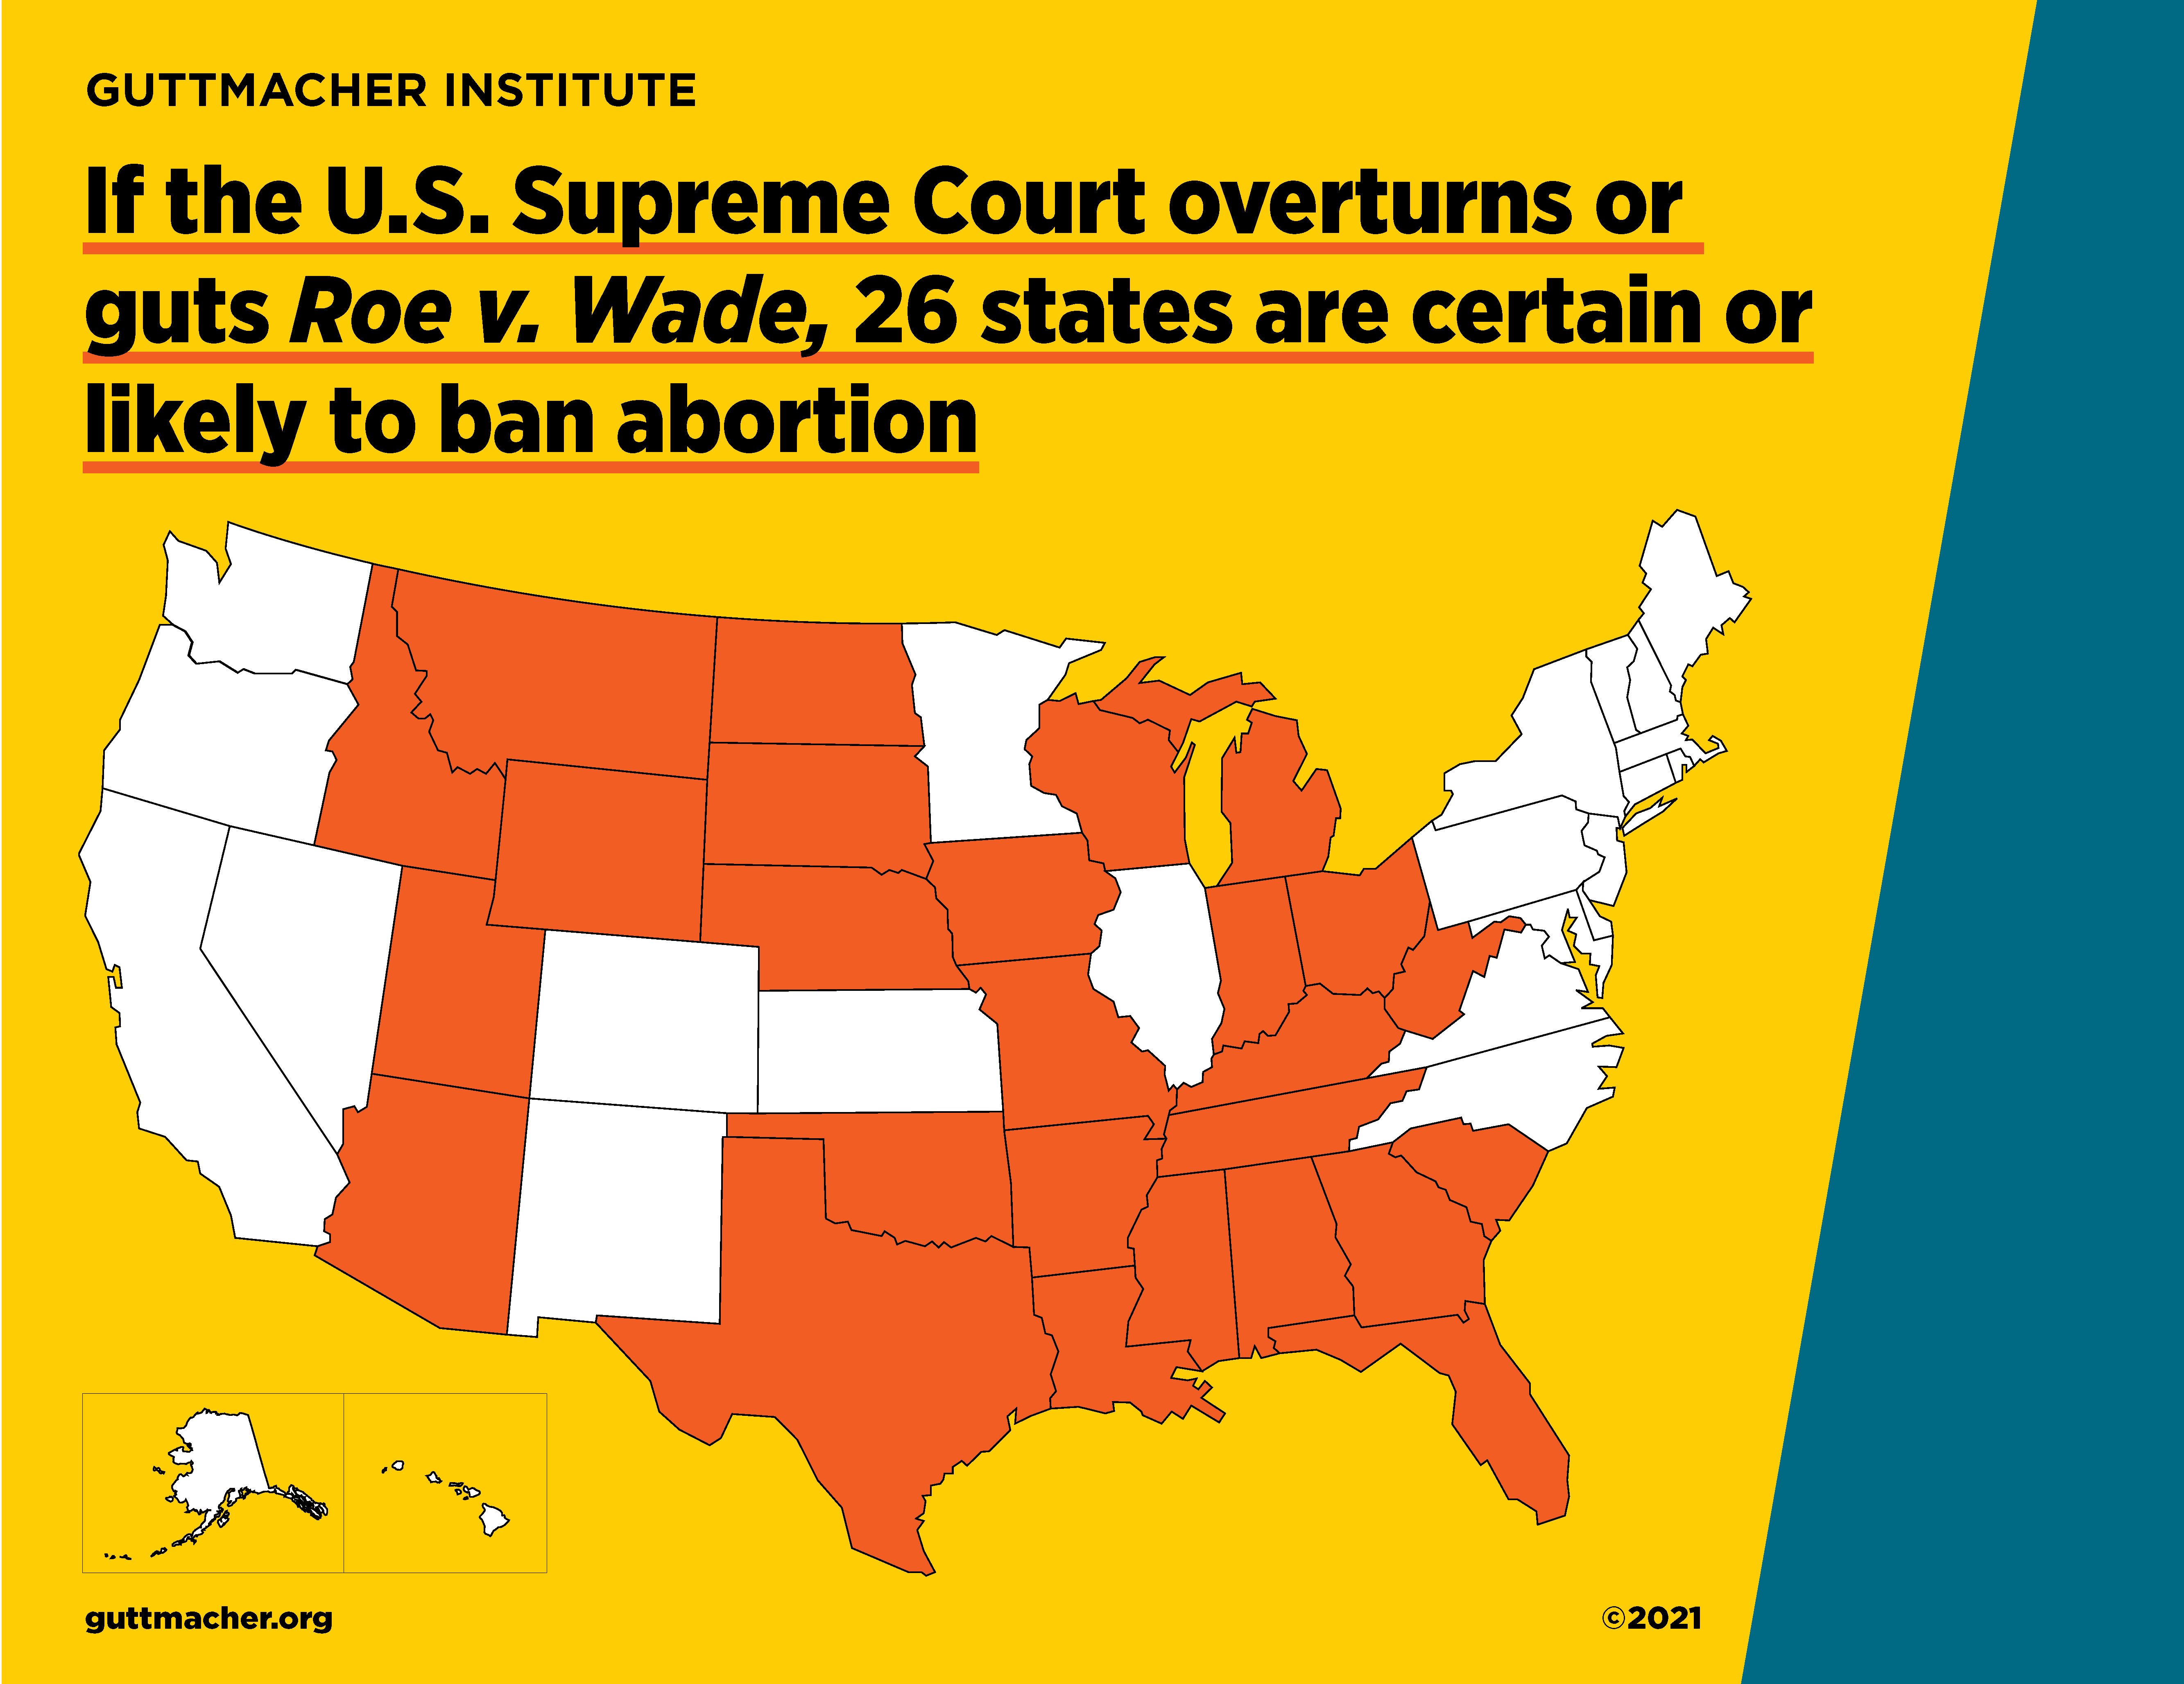 If the U.S. Supreme Court overturns or guts Roe v. Wade, 26 states are certain or likely to ban abortion